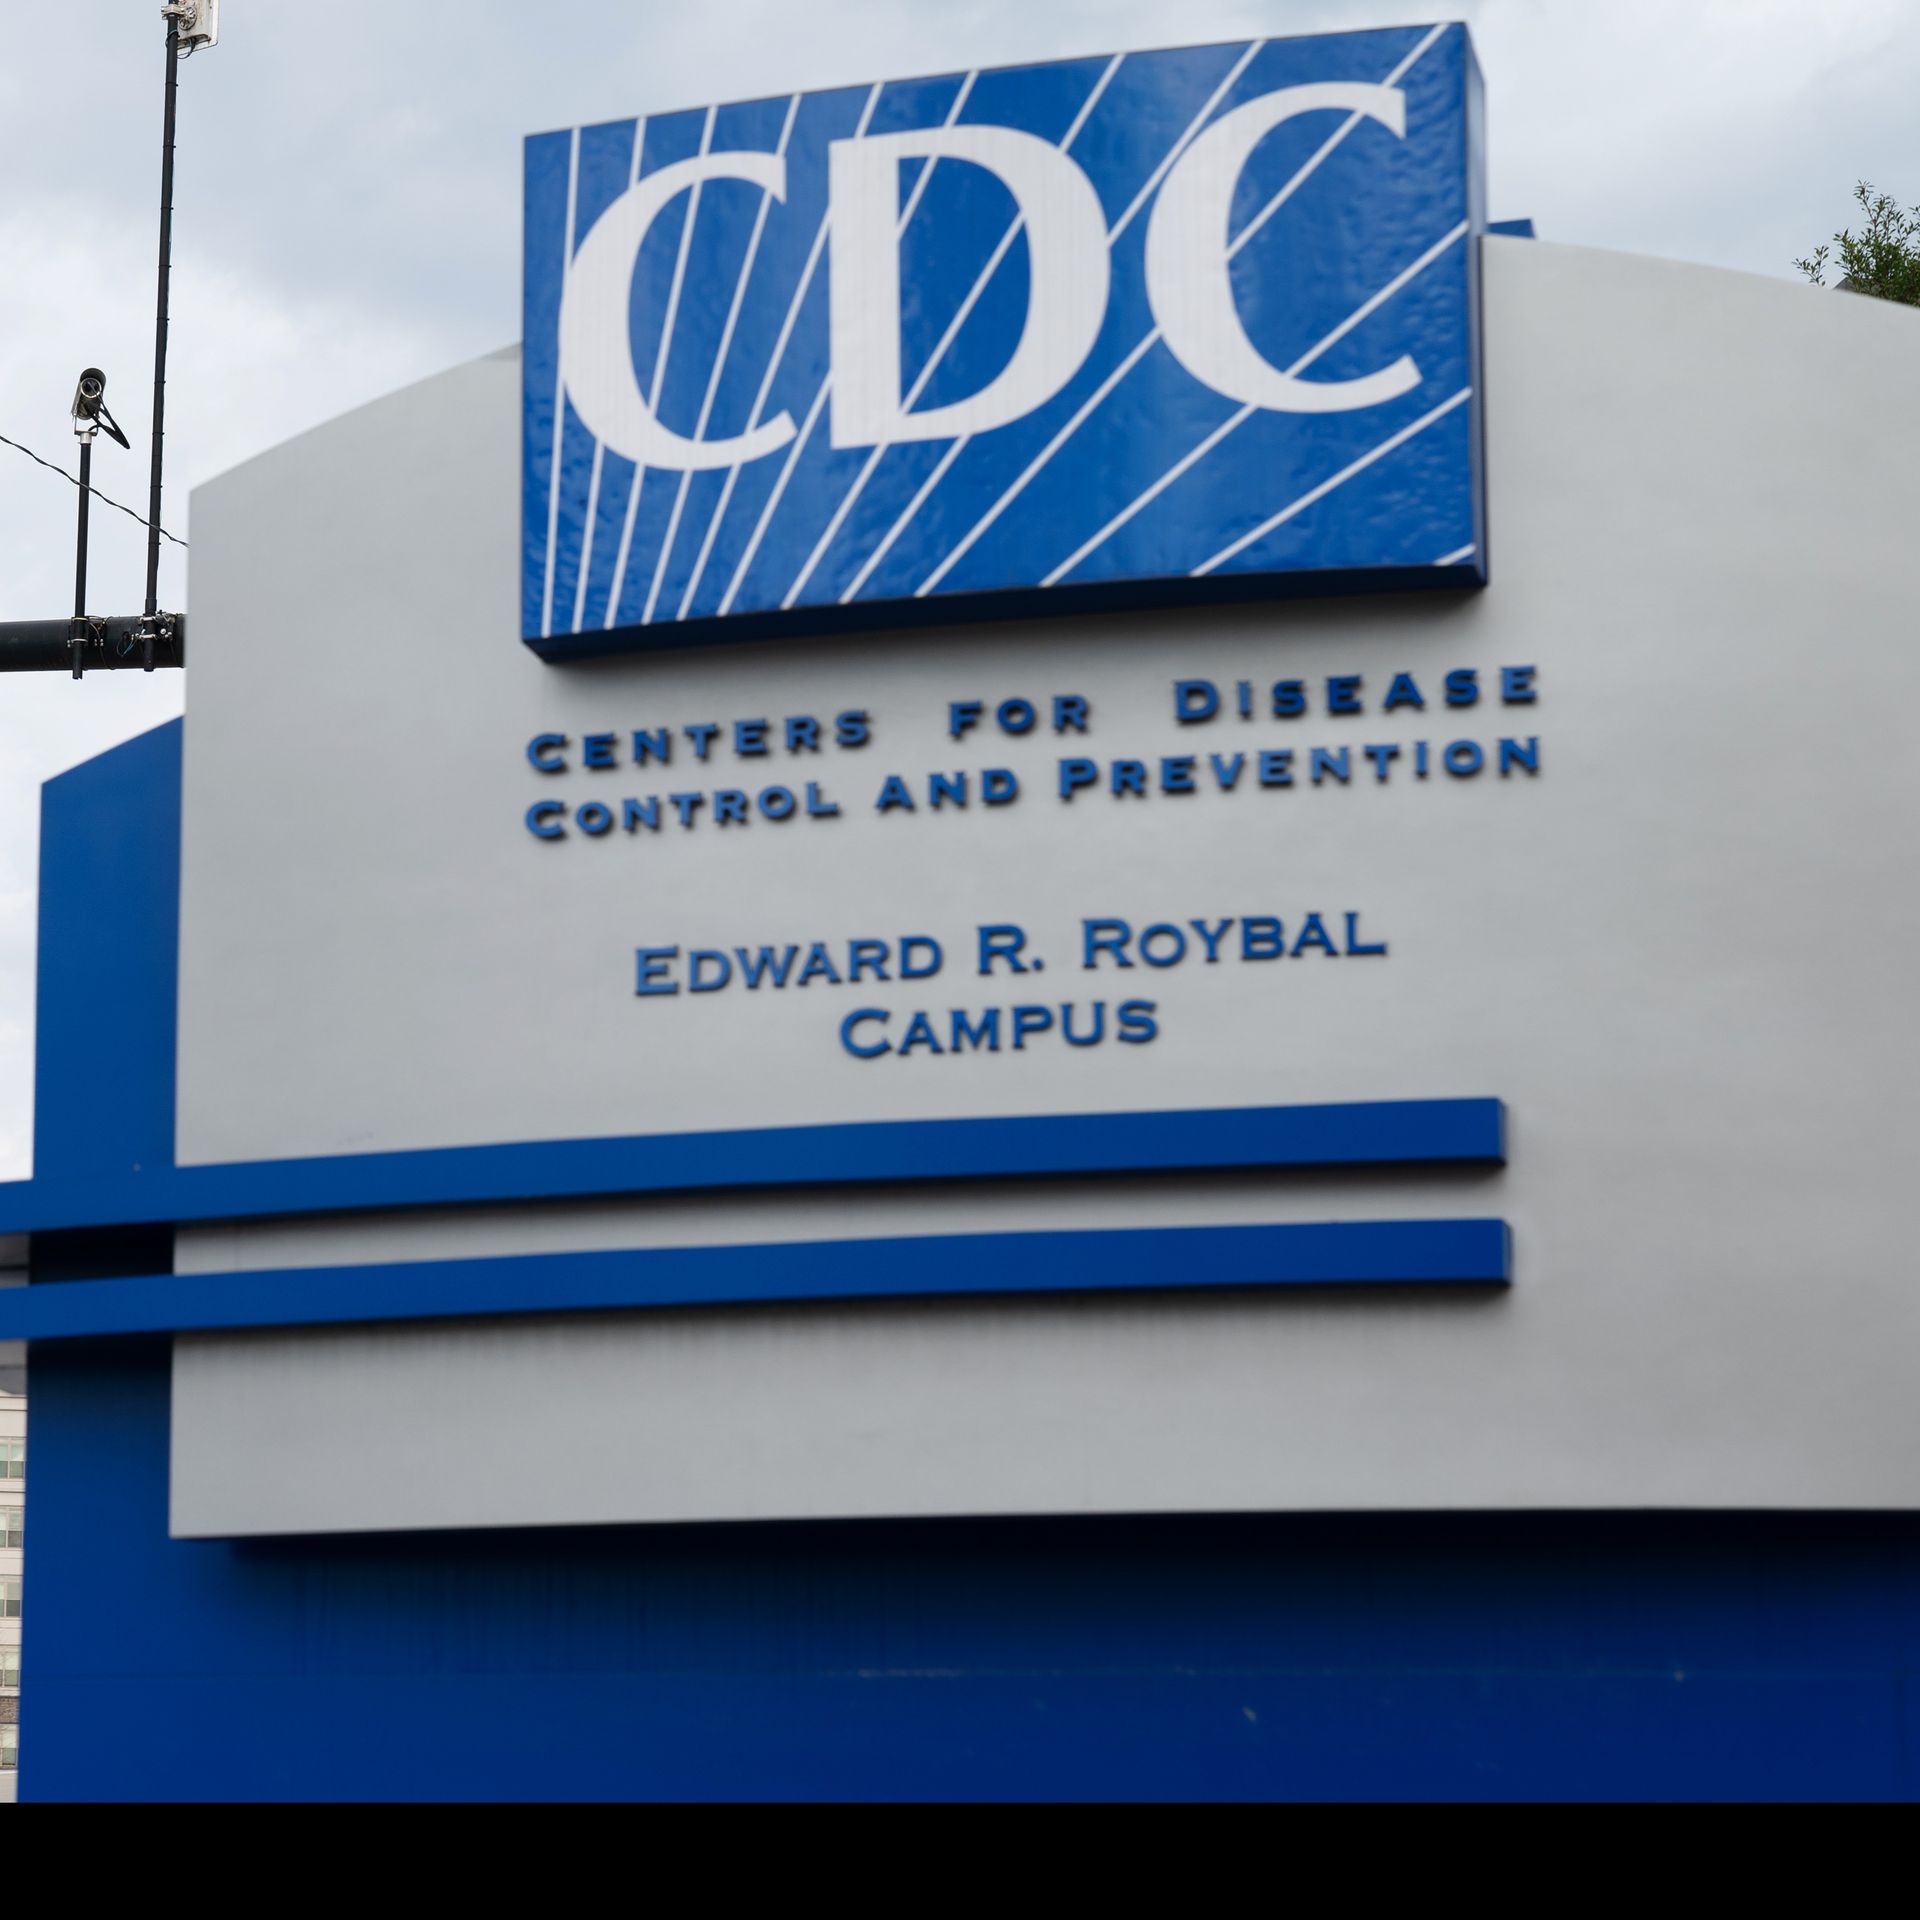  the Centers for Disease Control and Prevention (CDC) headquarters